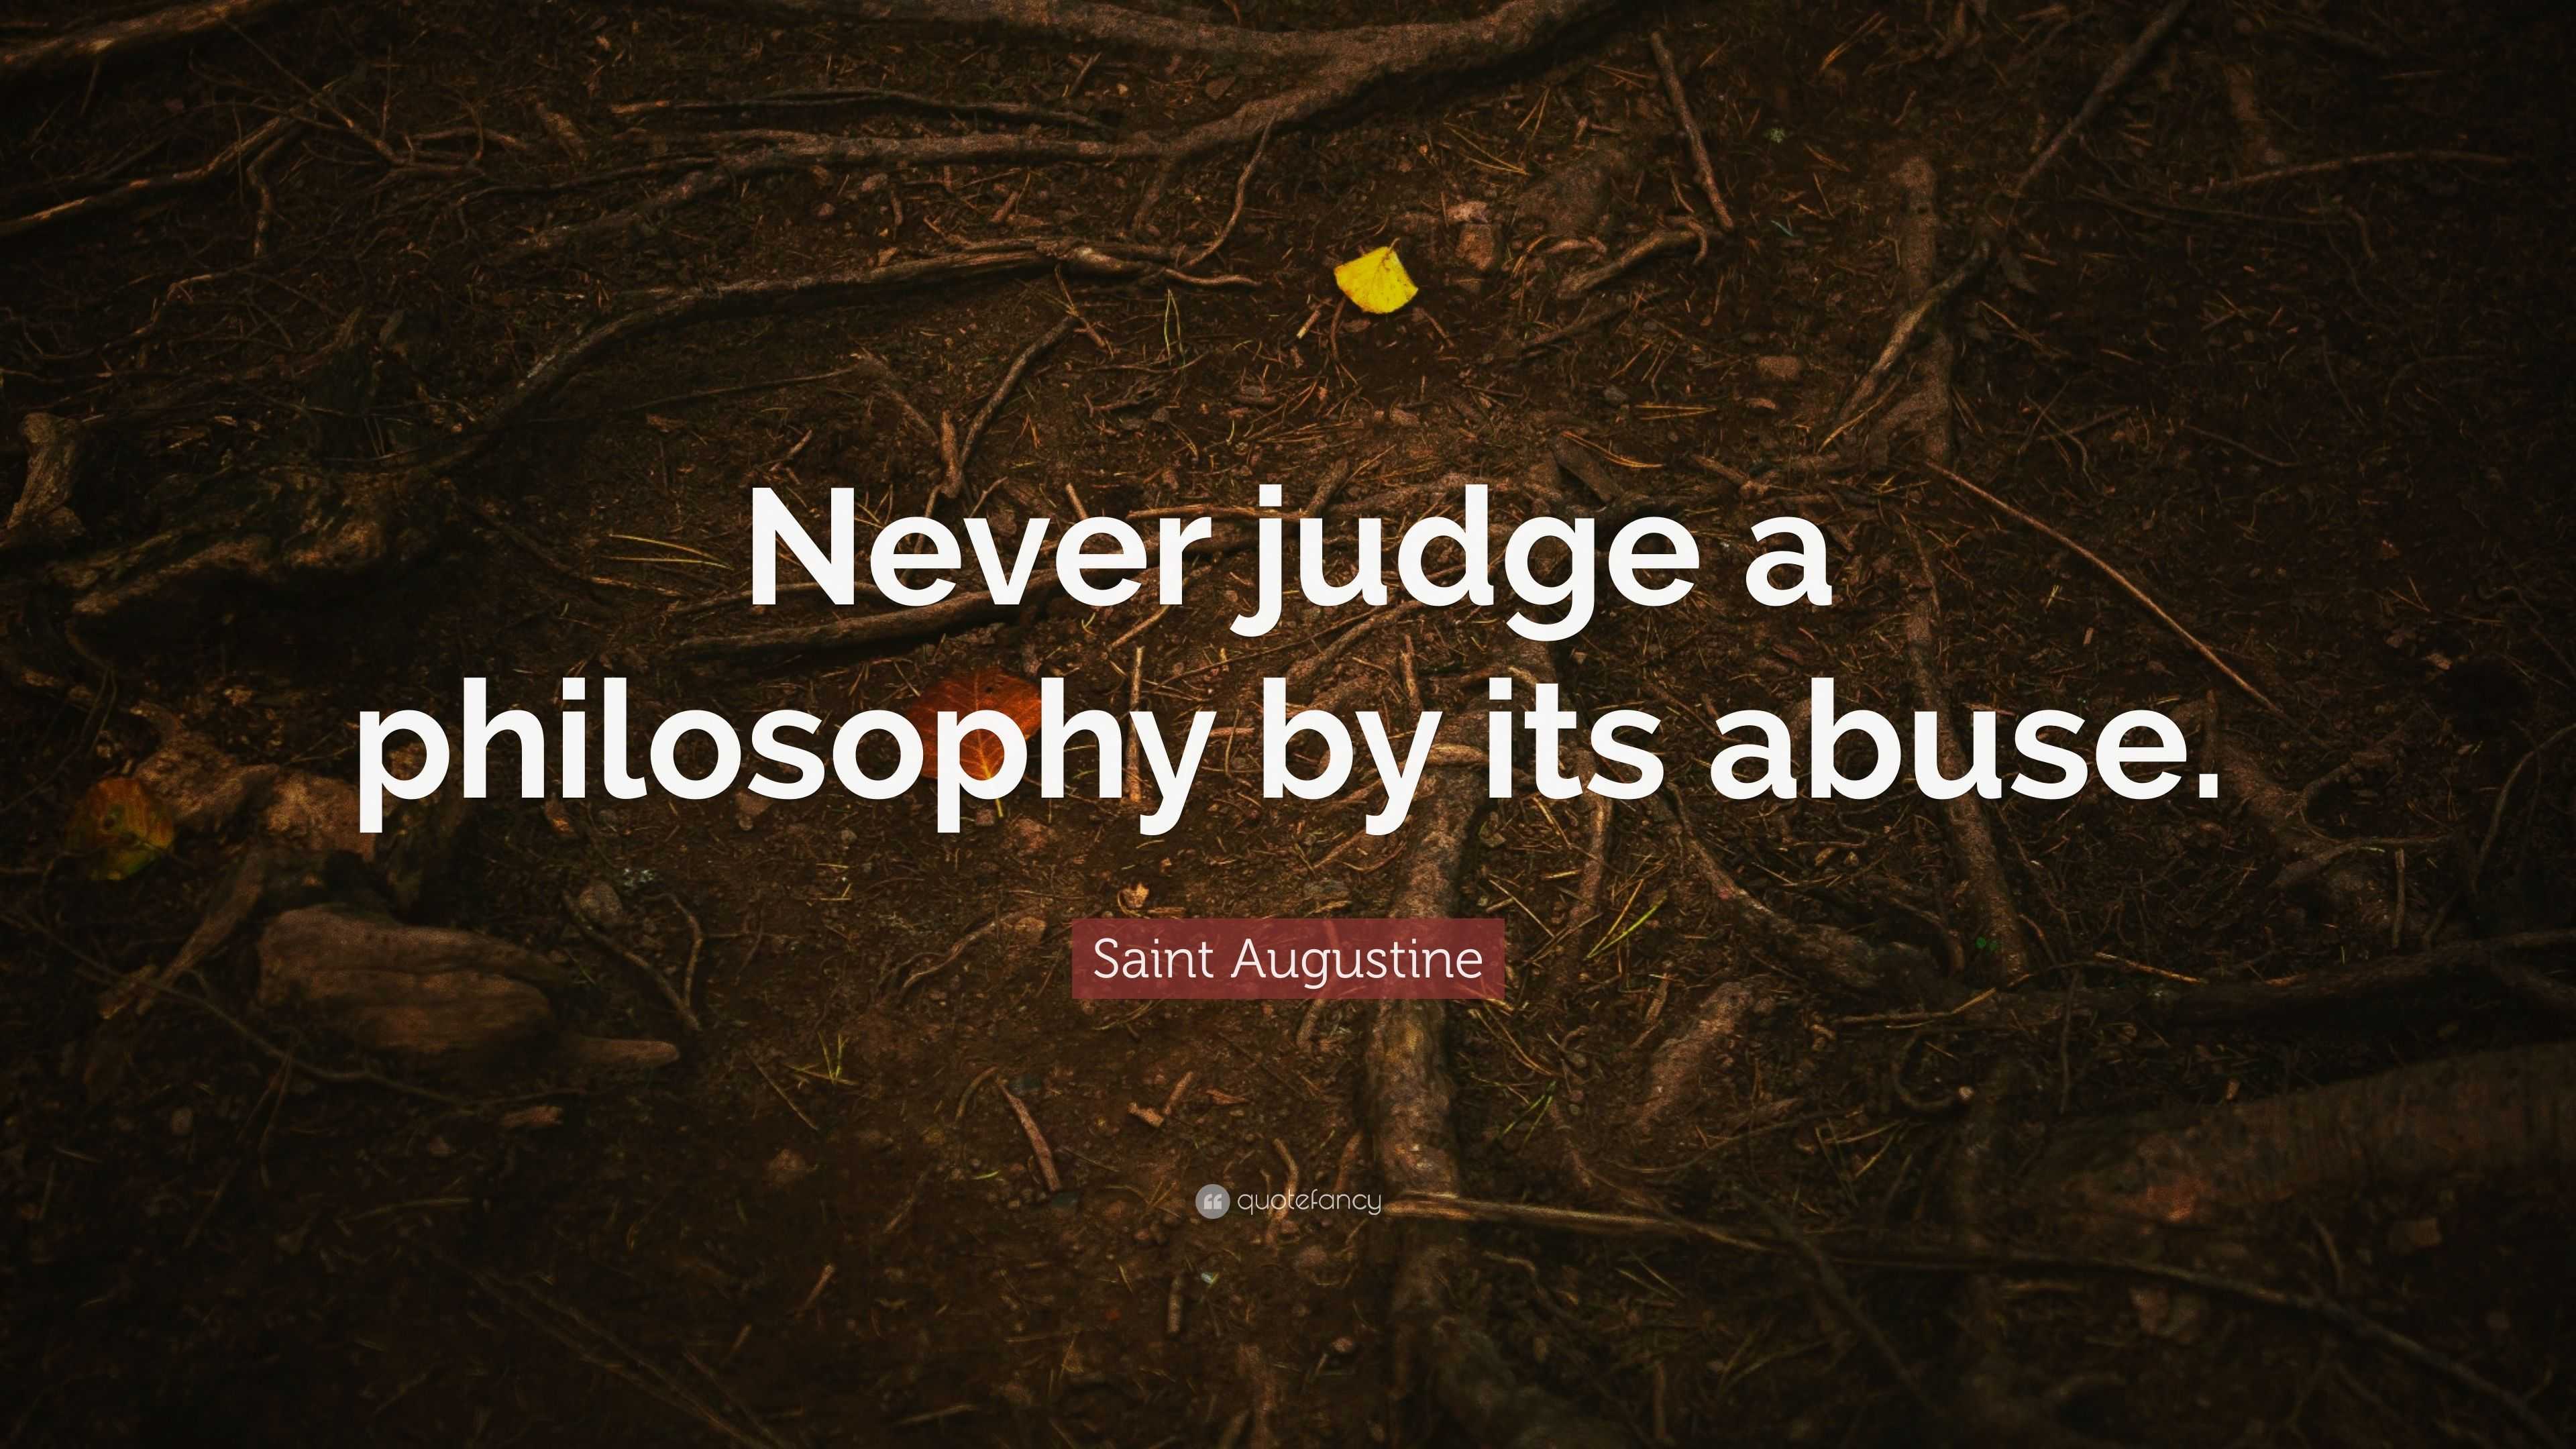 Saint Augustine Quote: "Never judge a philosophy by its ...